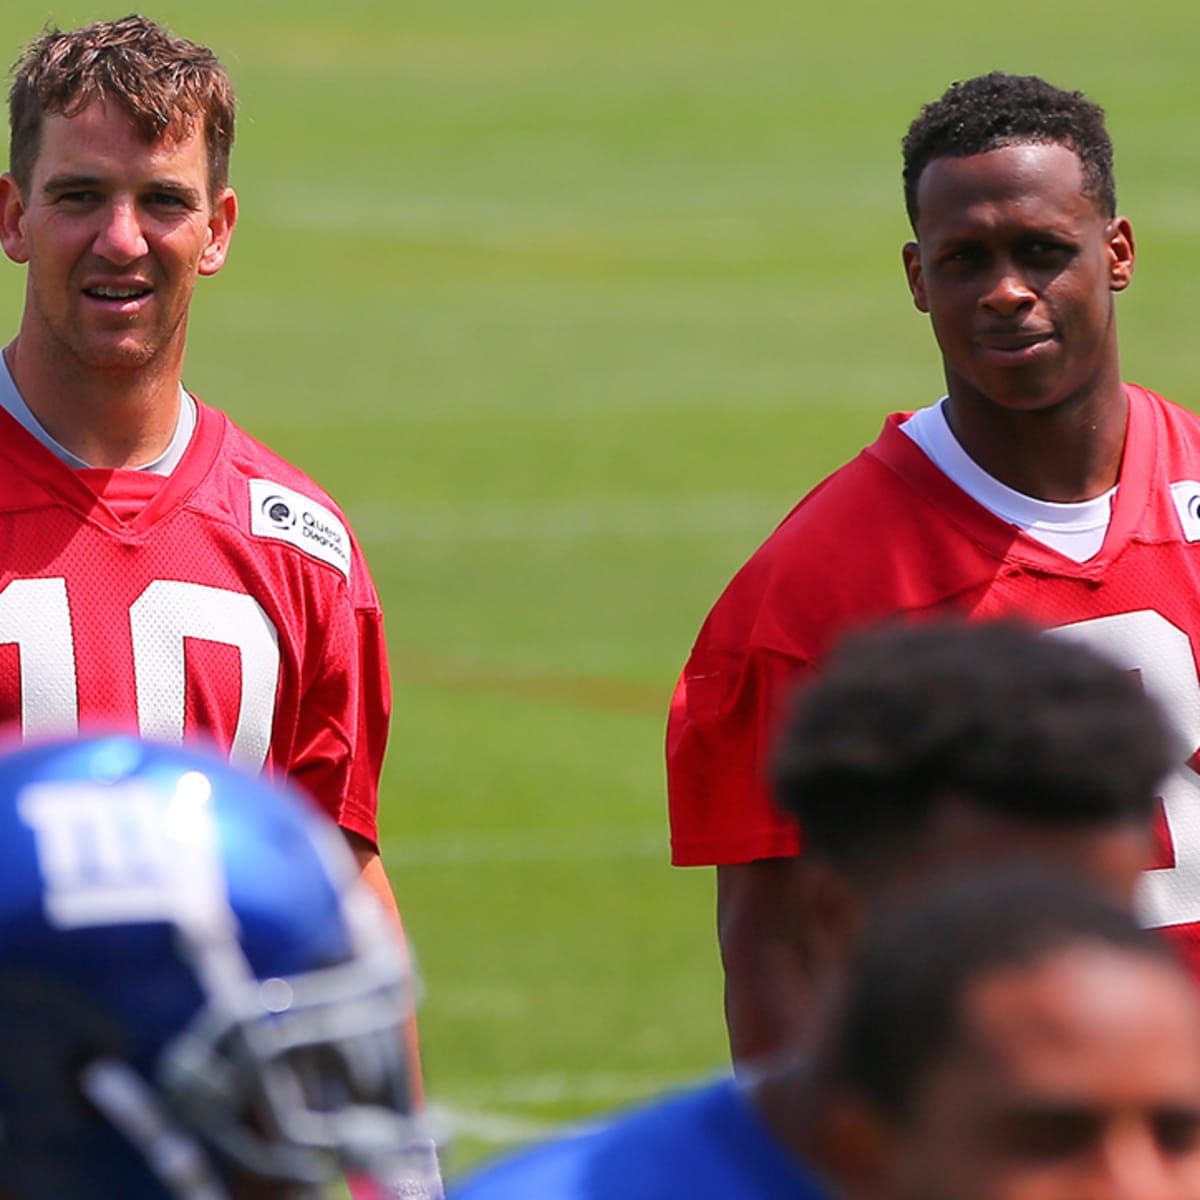 Giants Bench Eli Manning, Opting for Geno Smith as Quarterback - The New  York Times